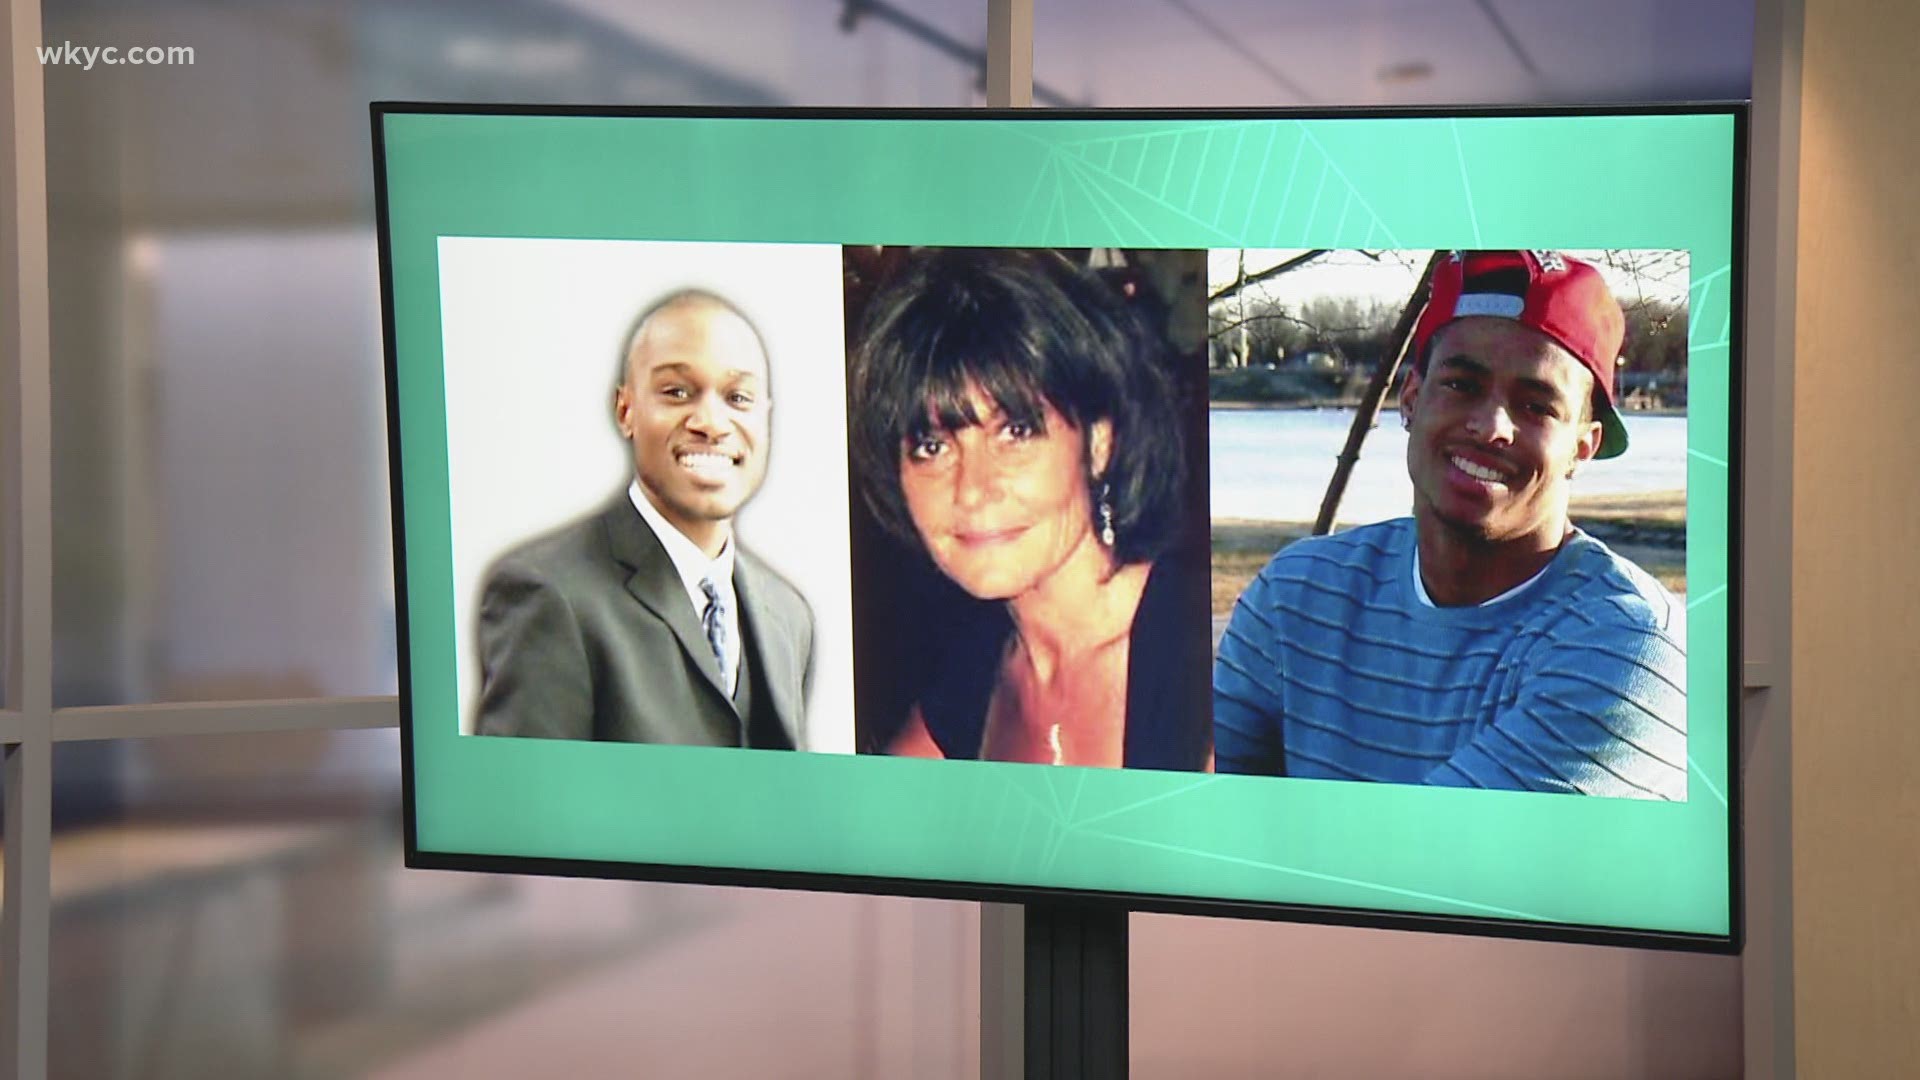 The bureau will help Cleveland police investigate three years-old murders.